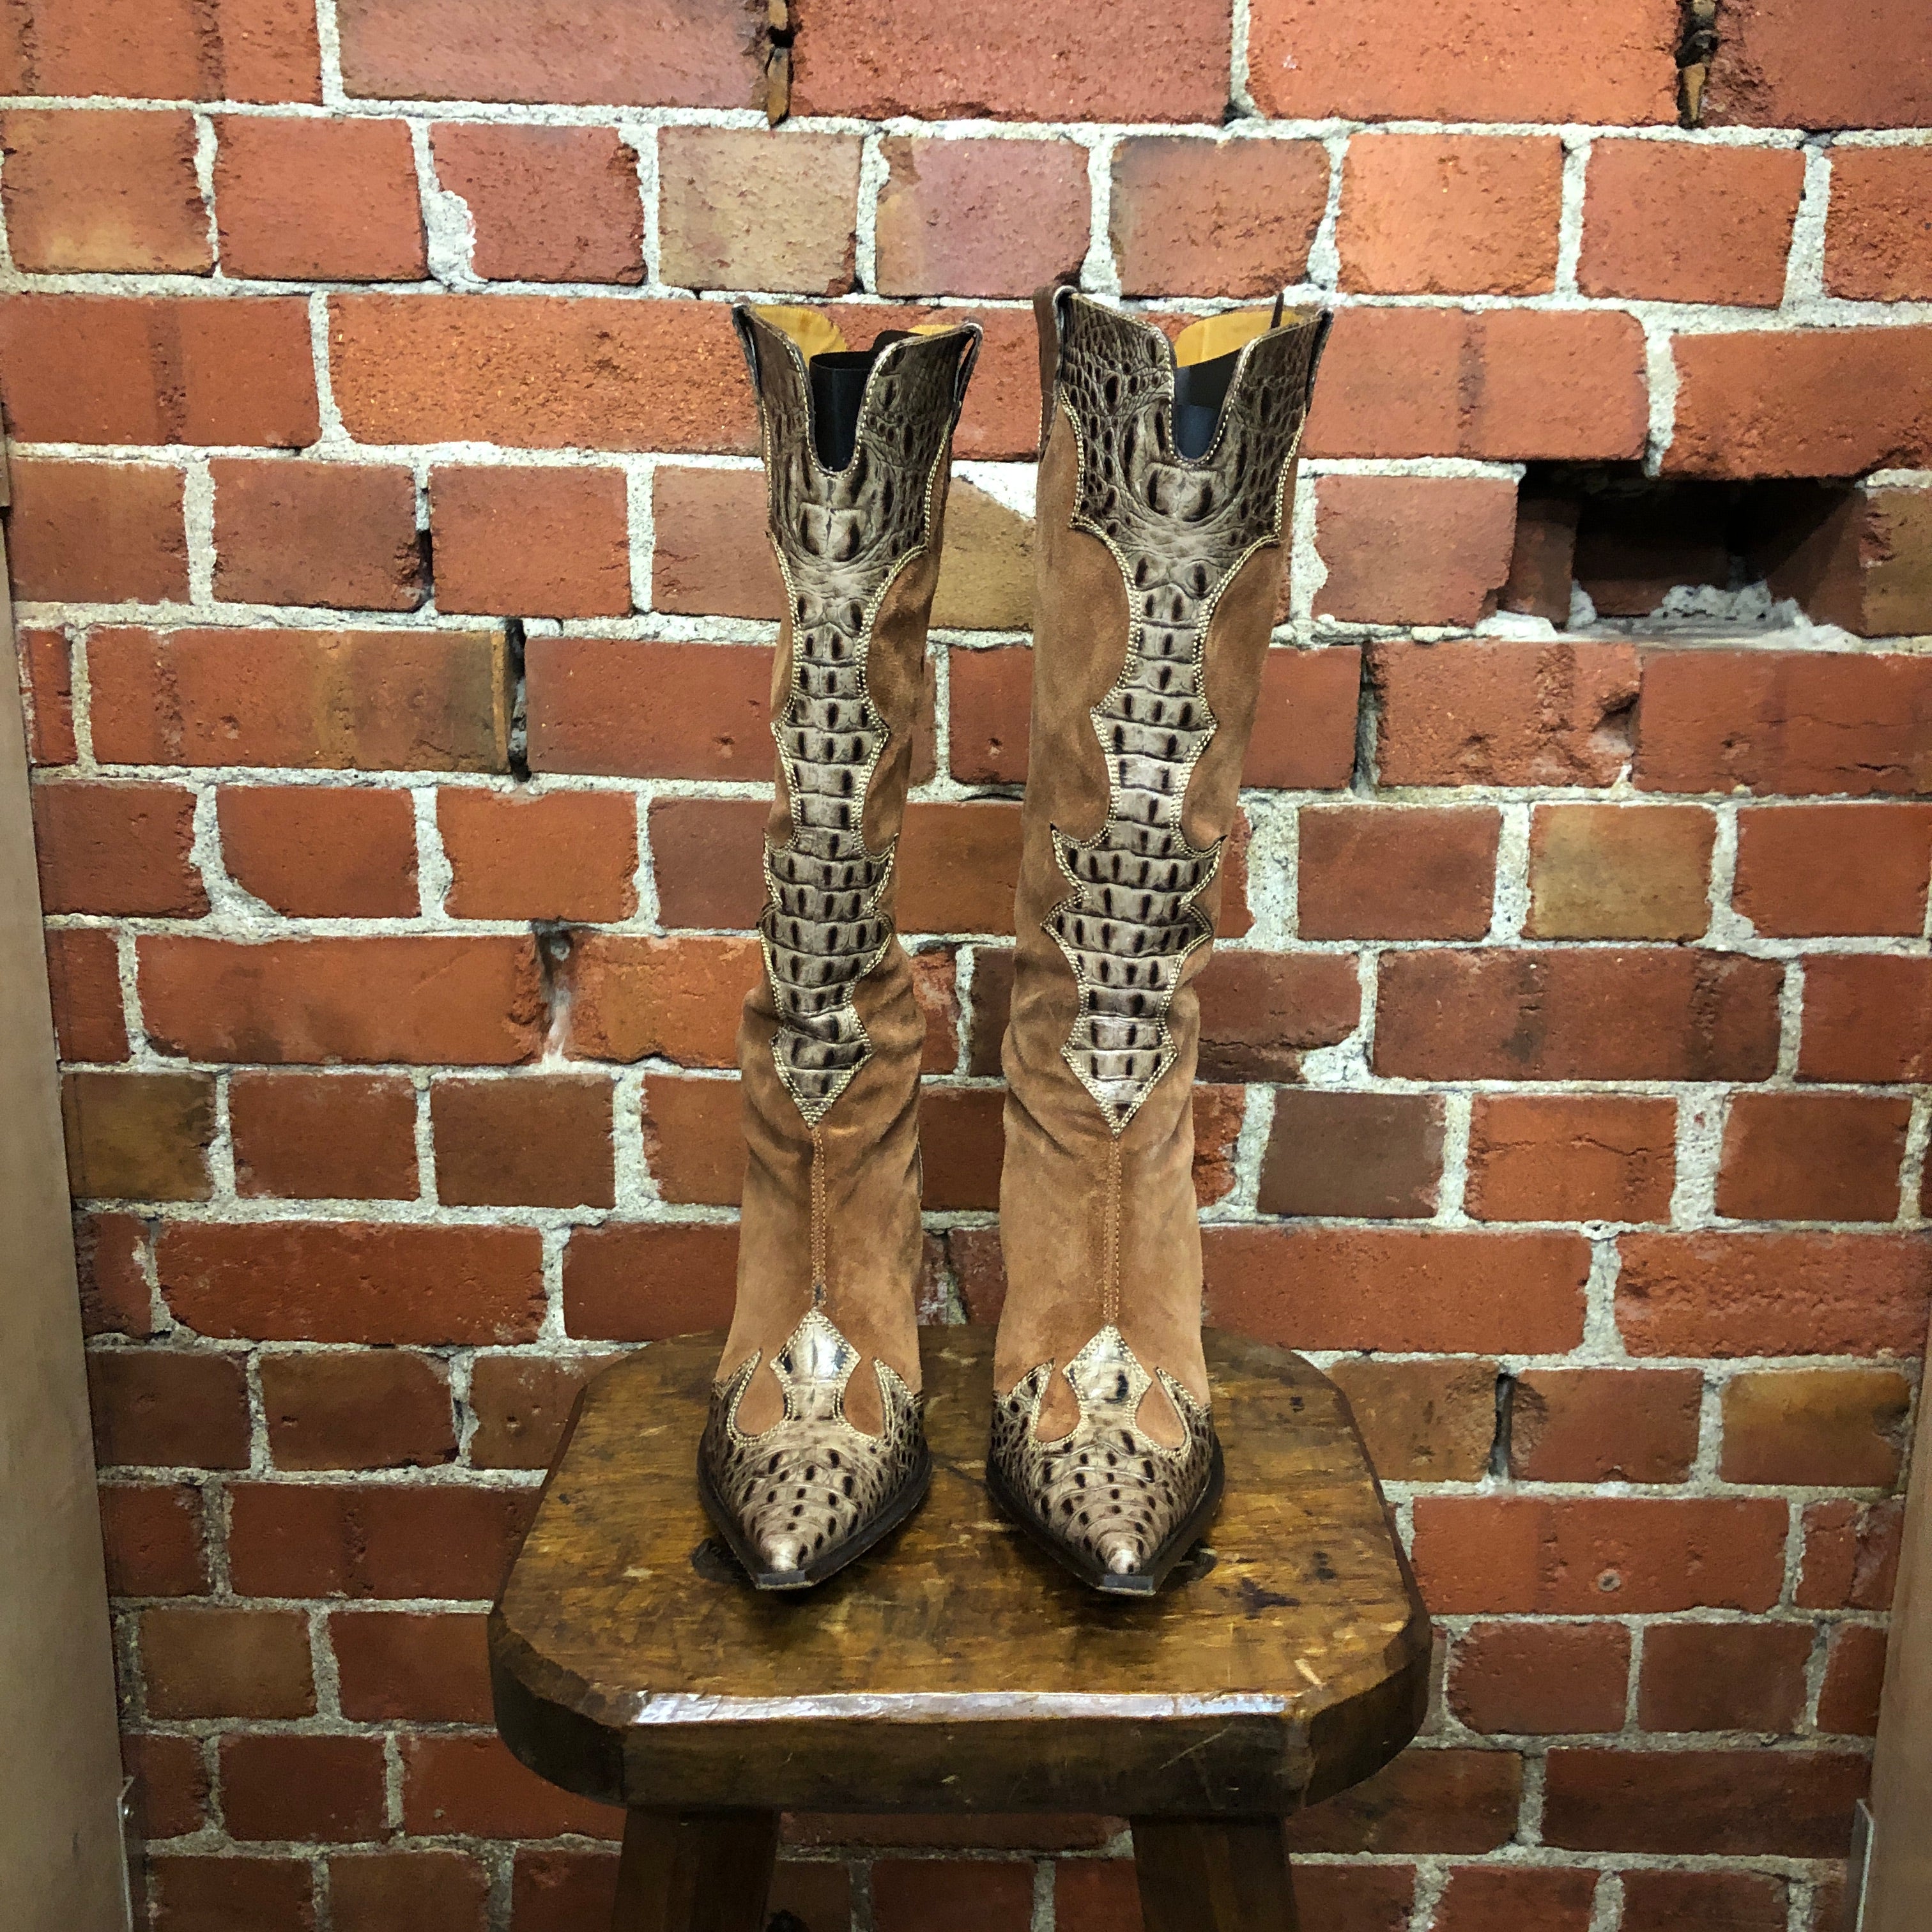 STUNNING, SEXY, SNAKEPRINT and Suede western boots! 39